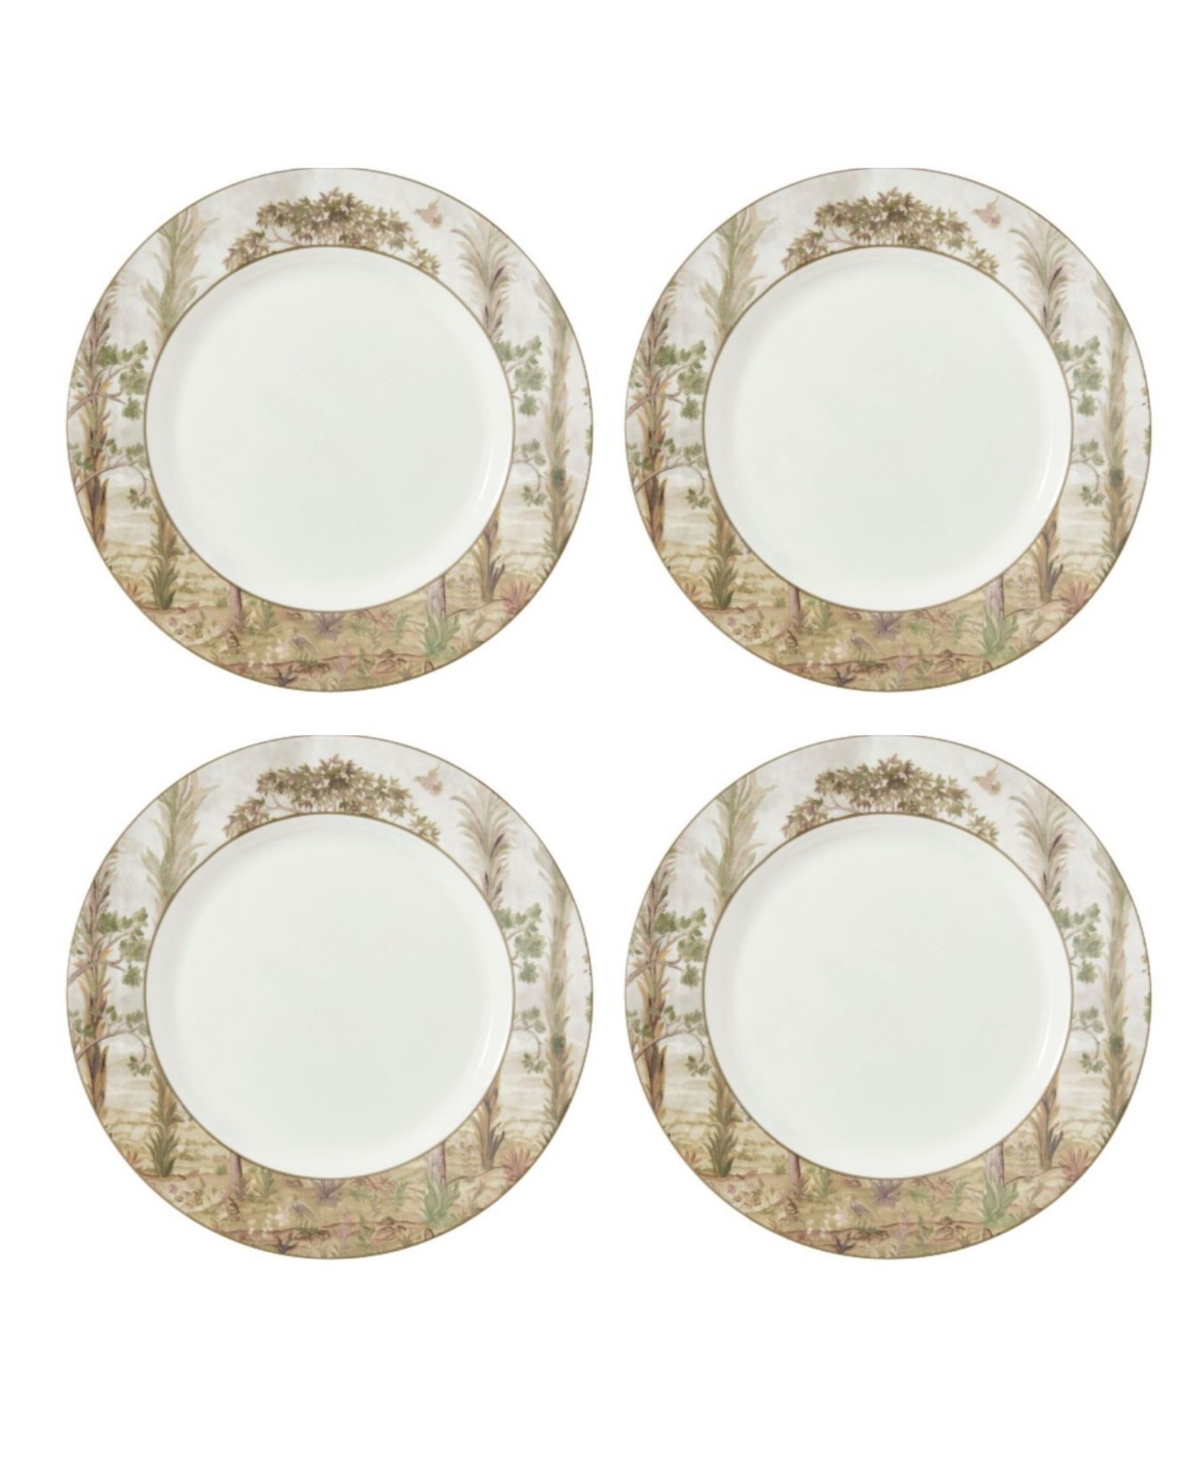 Tall Trees 4 Piece Dinner Plates Set, Service for 4 - Assorted